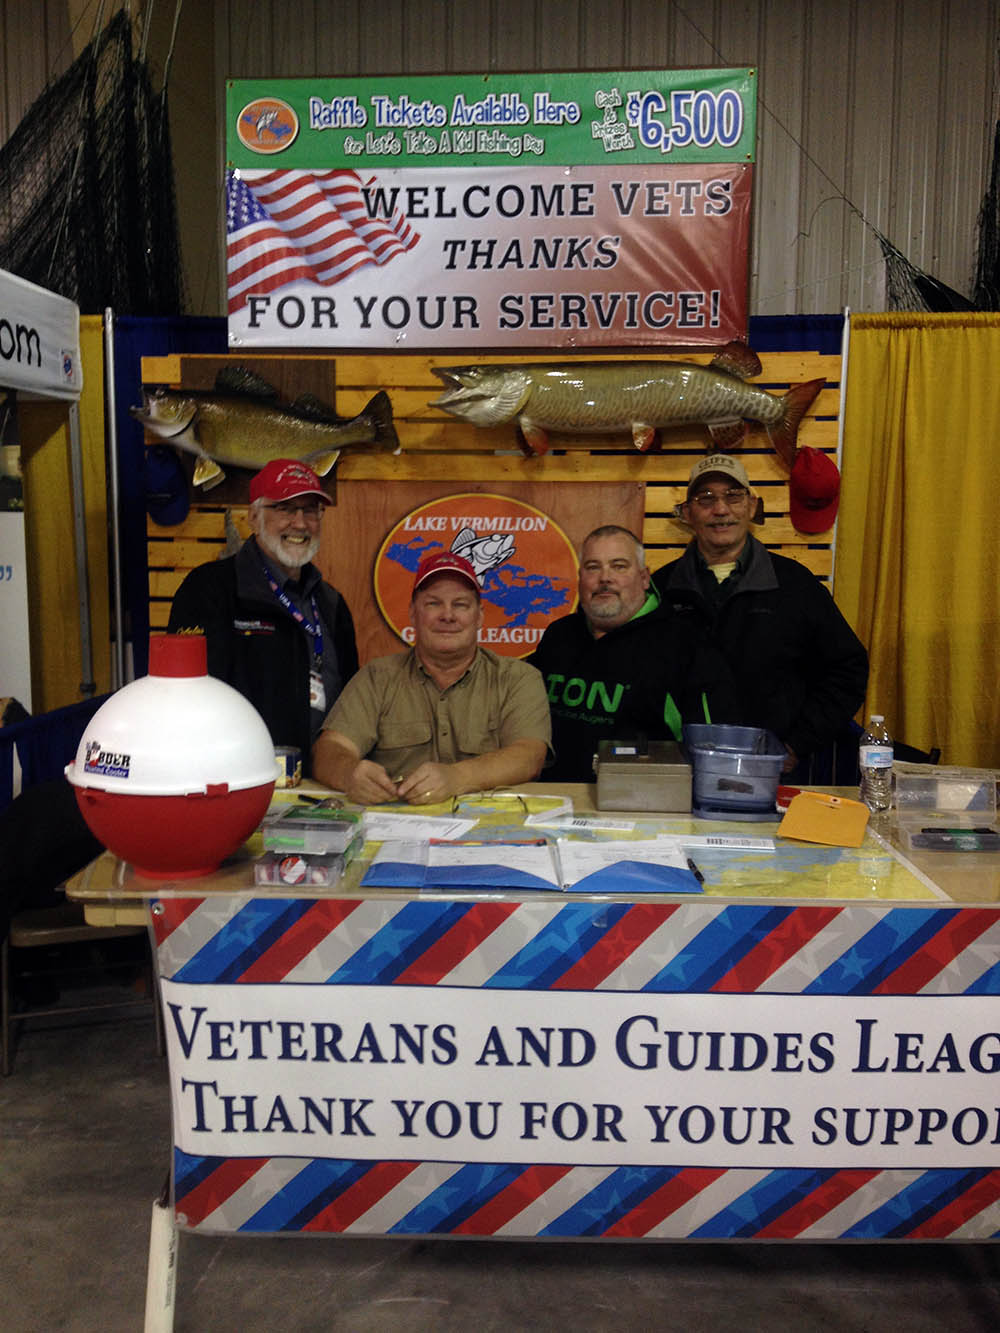 Thank you vets for your service booth image